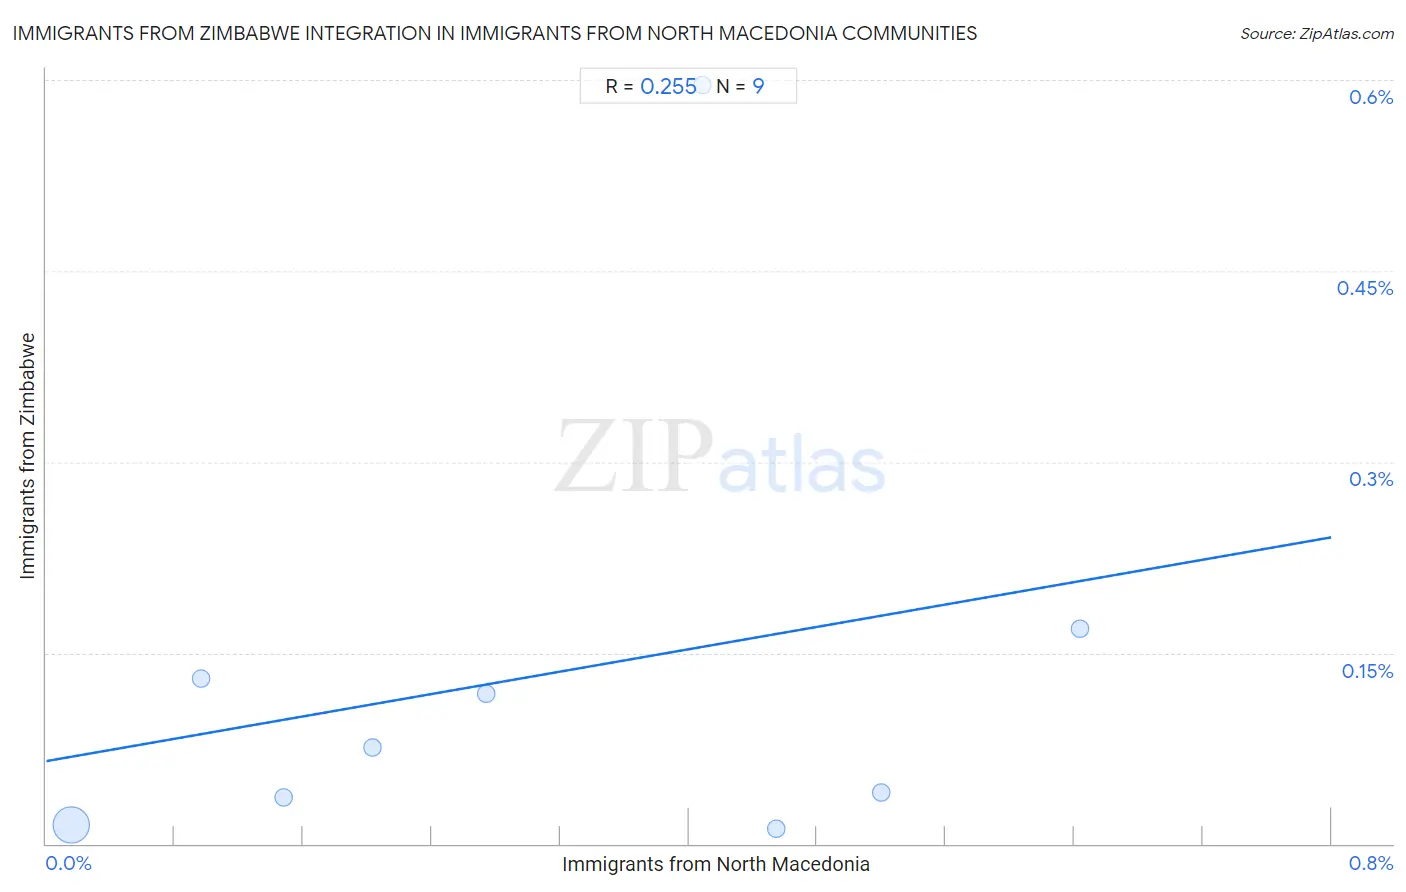 Immigrants from North Macedonia Integration in Immigrants from Zimbabwe Communities